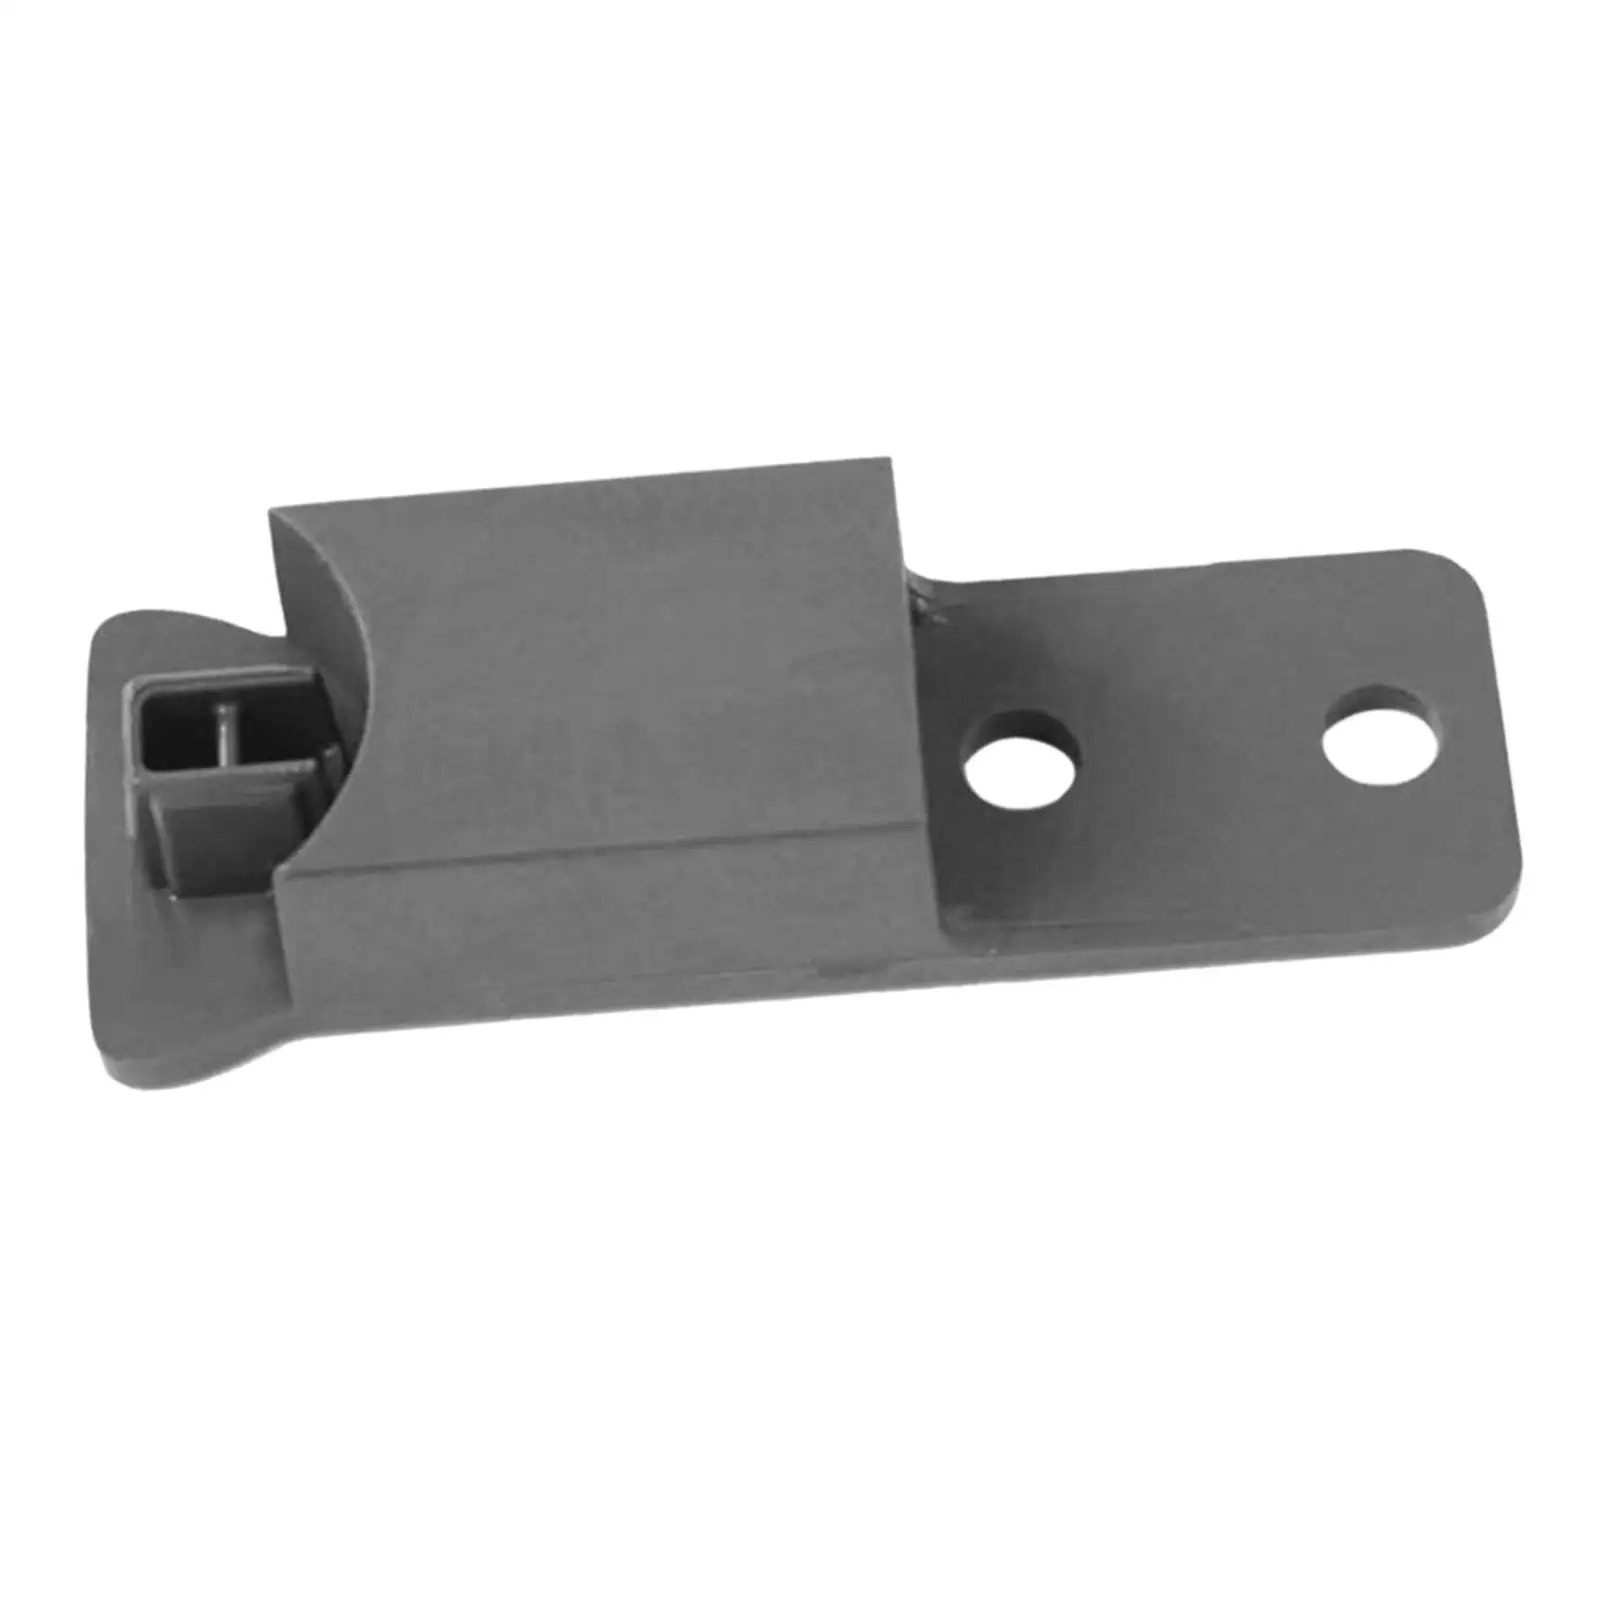 Handle End Cap Direct Replaces Accessory Appliance Cap W10917049 AP6036240 W10838116 for Whirlpool Refrigerator